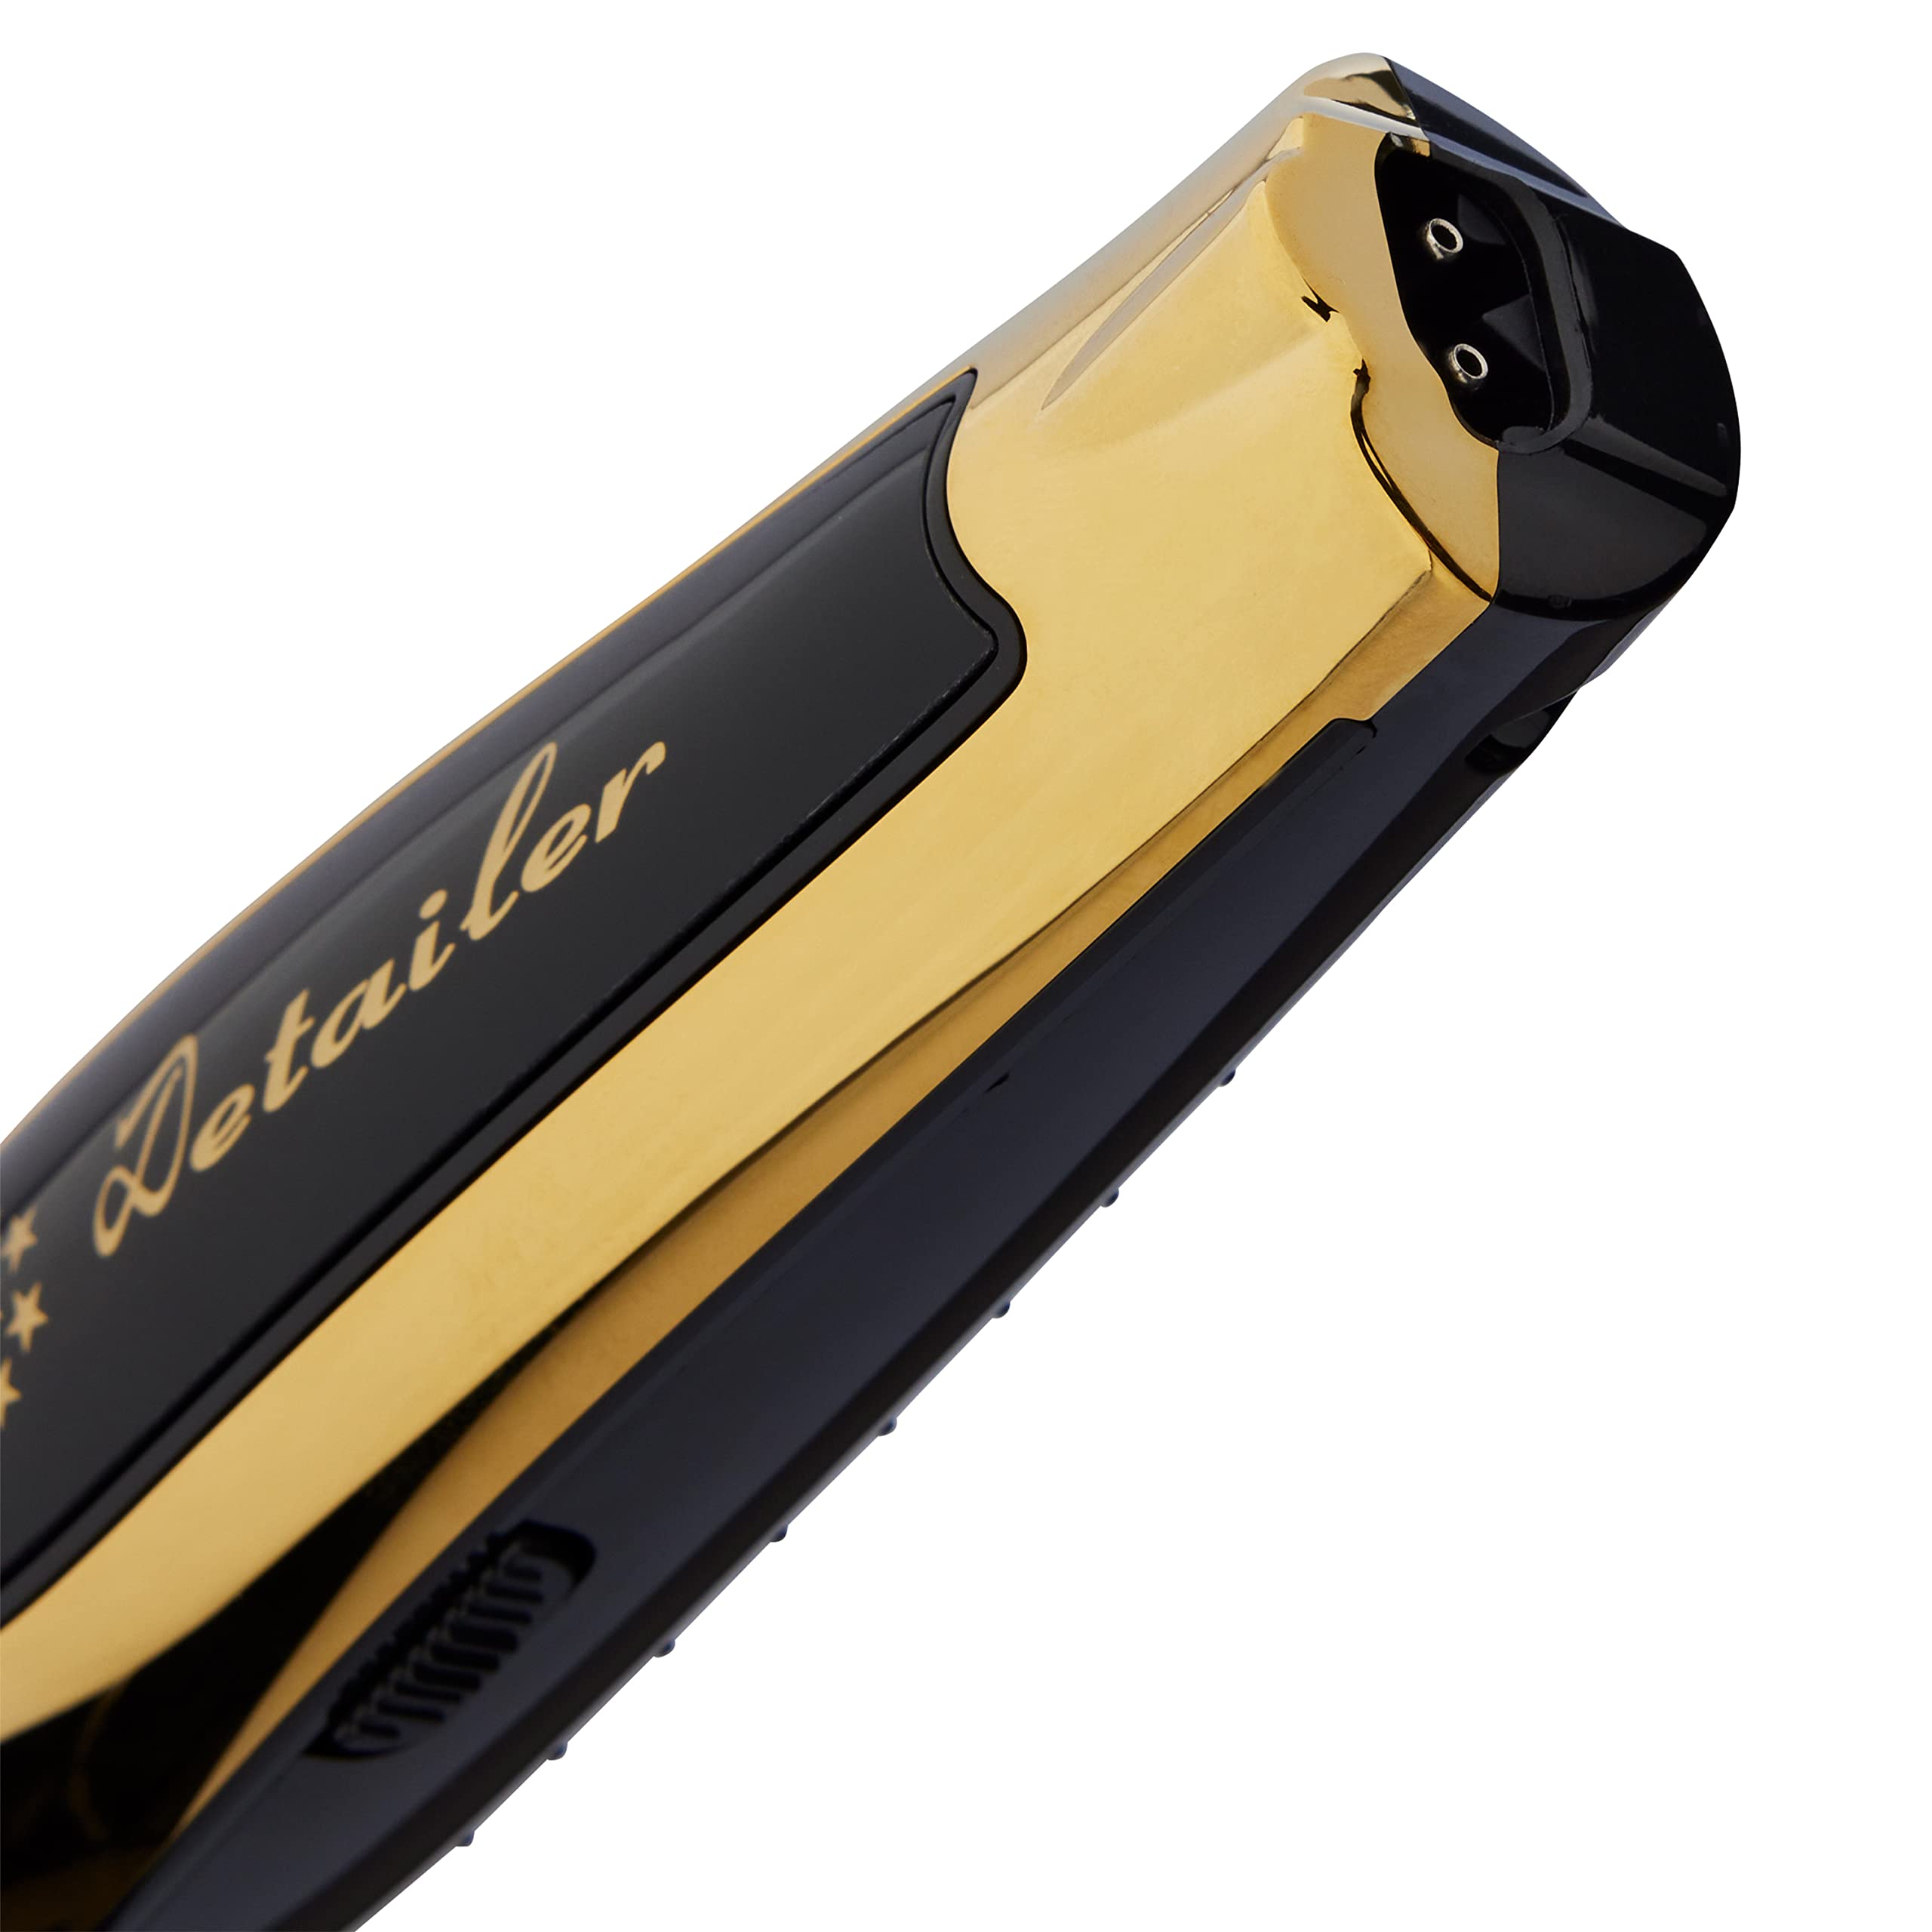 Wahl Professional 5 Star Gold Cordless Detailer Li Trimmer for Professional Barbers and Stylists